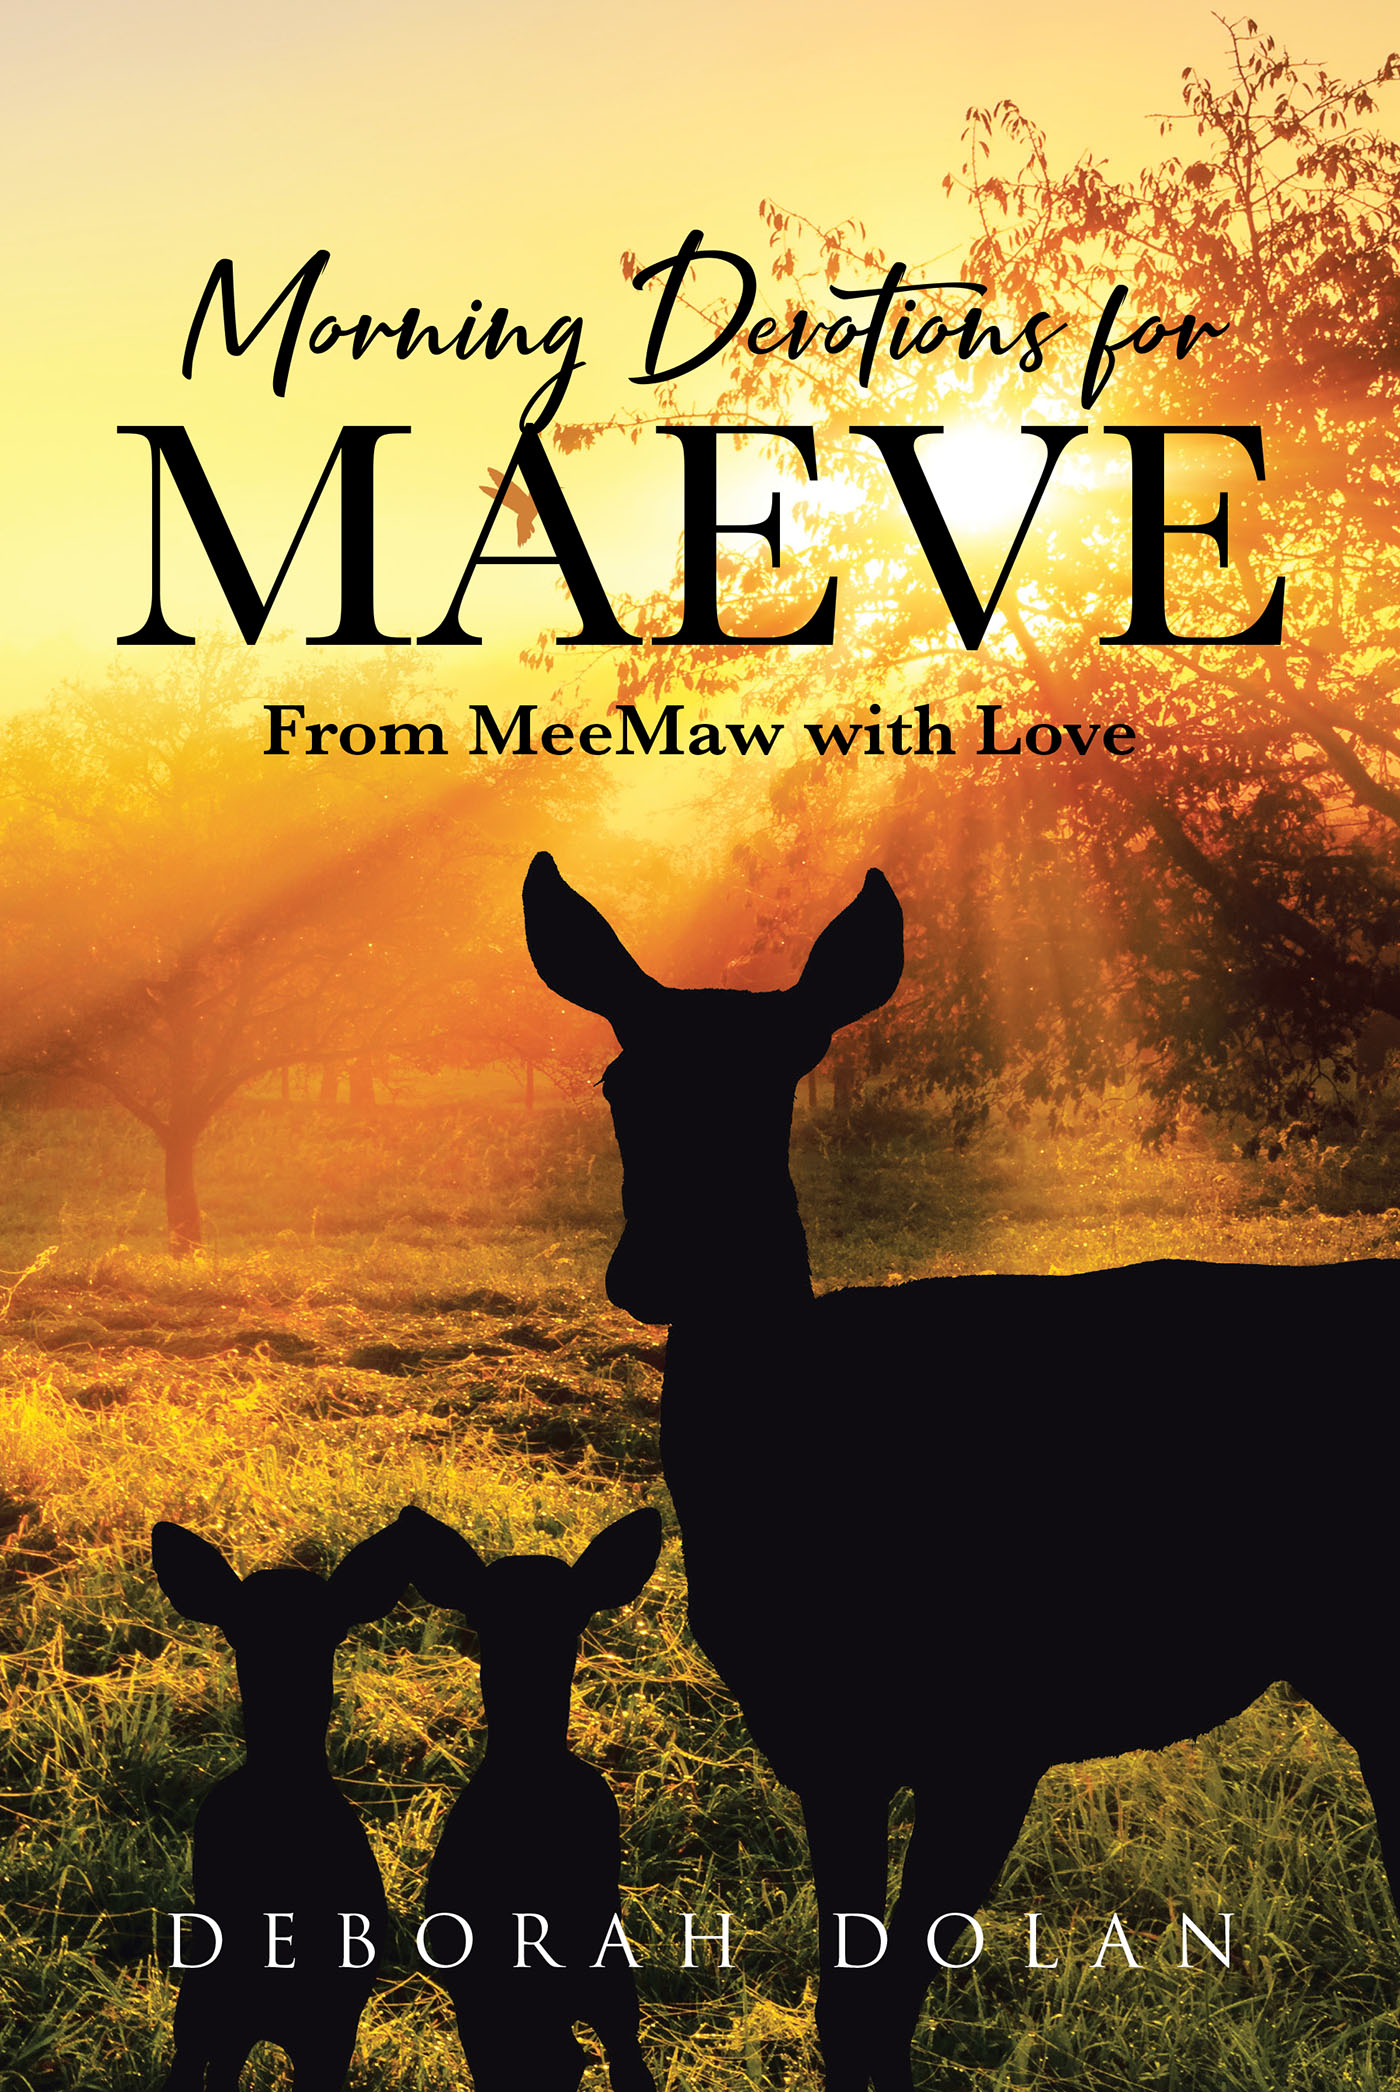 Author Deborah Dolan’s New Book, “Morning Devotions for Maeve: From MeeMaw with Love,” is a Series of Devotionals the Author Initially Wrote for Her Granddaughter